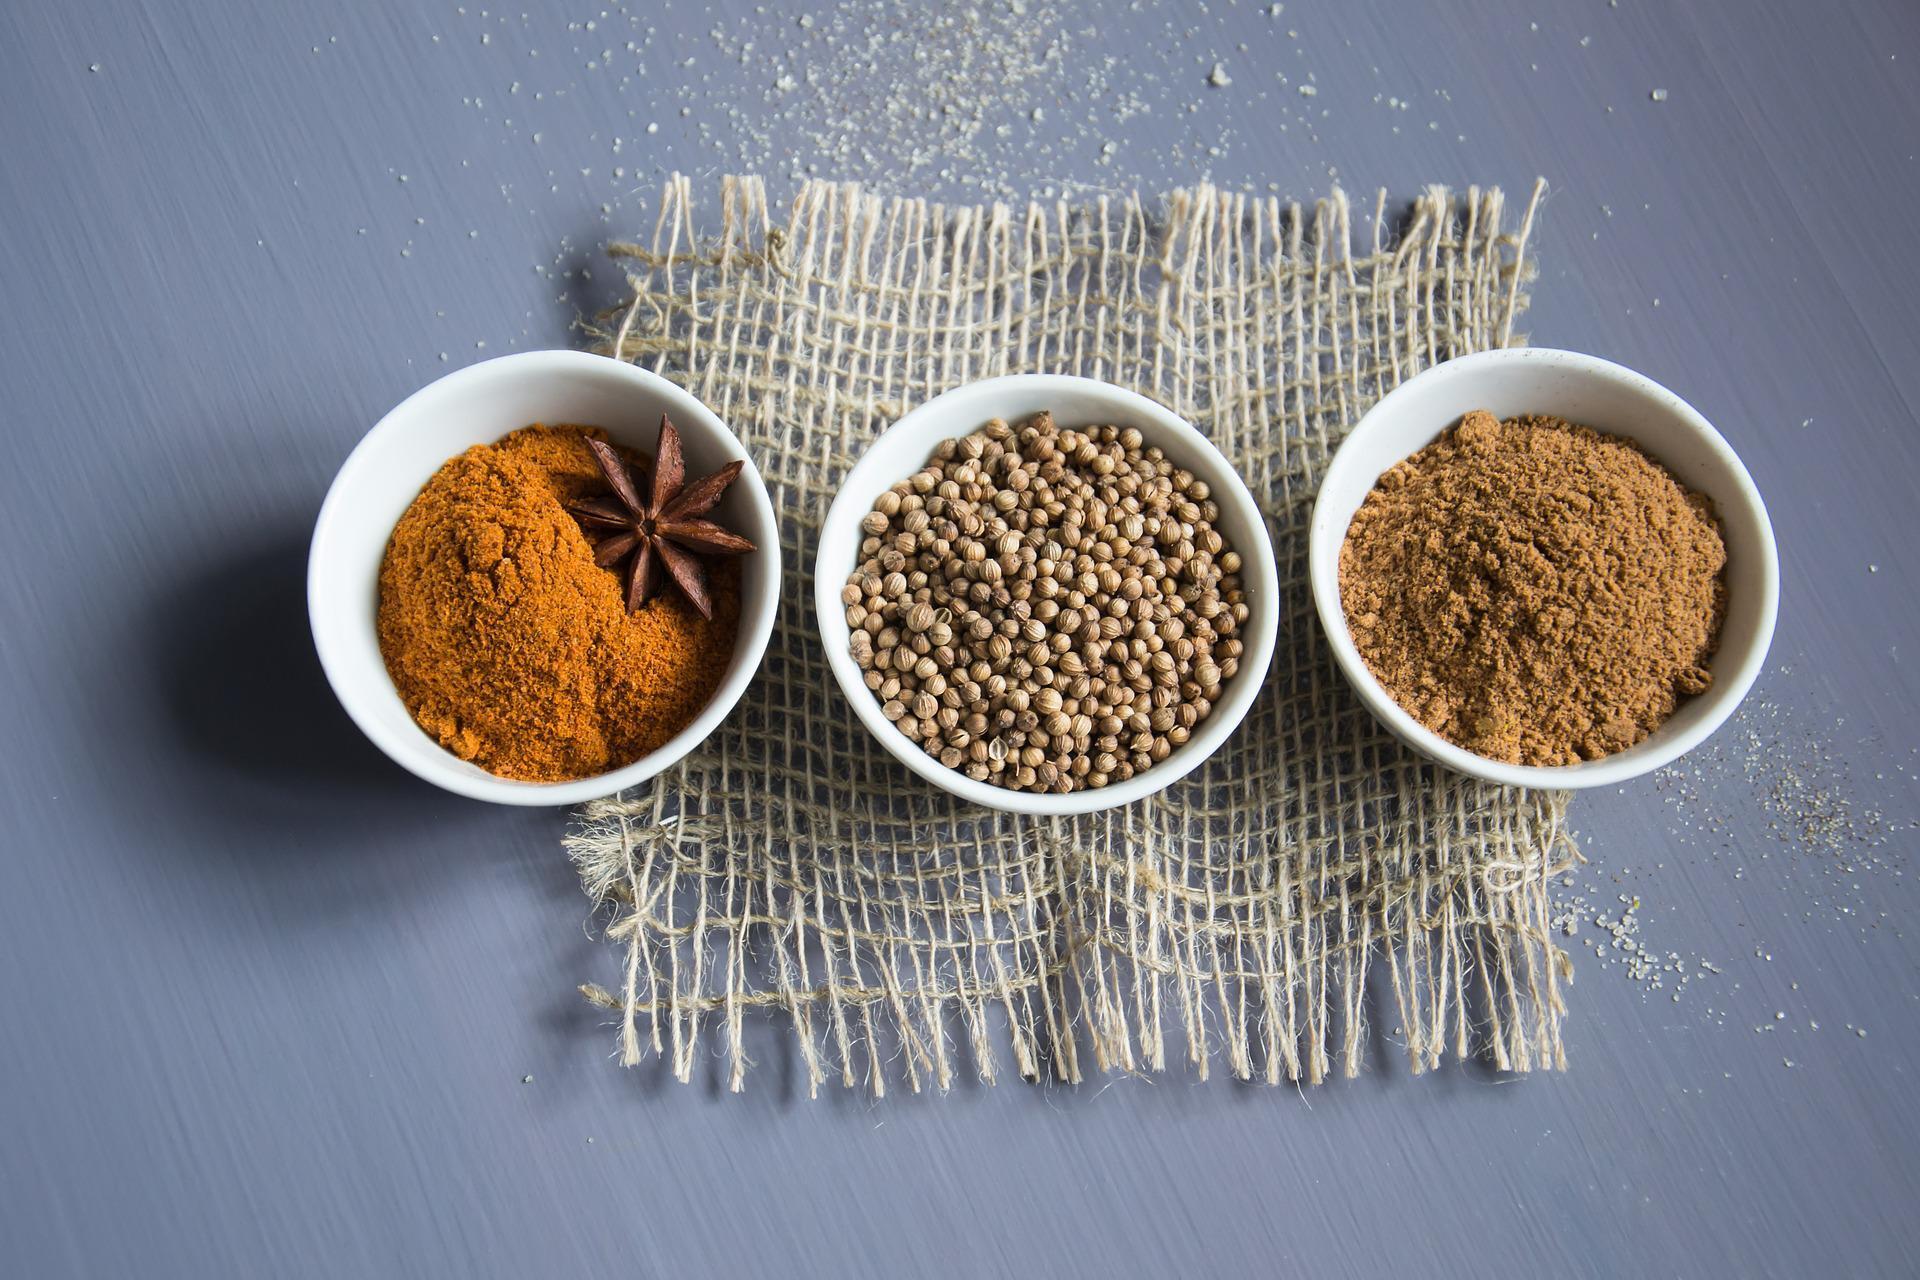 A mixture of spices